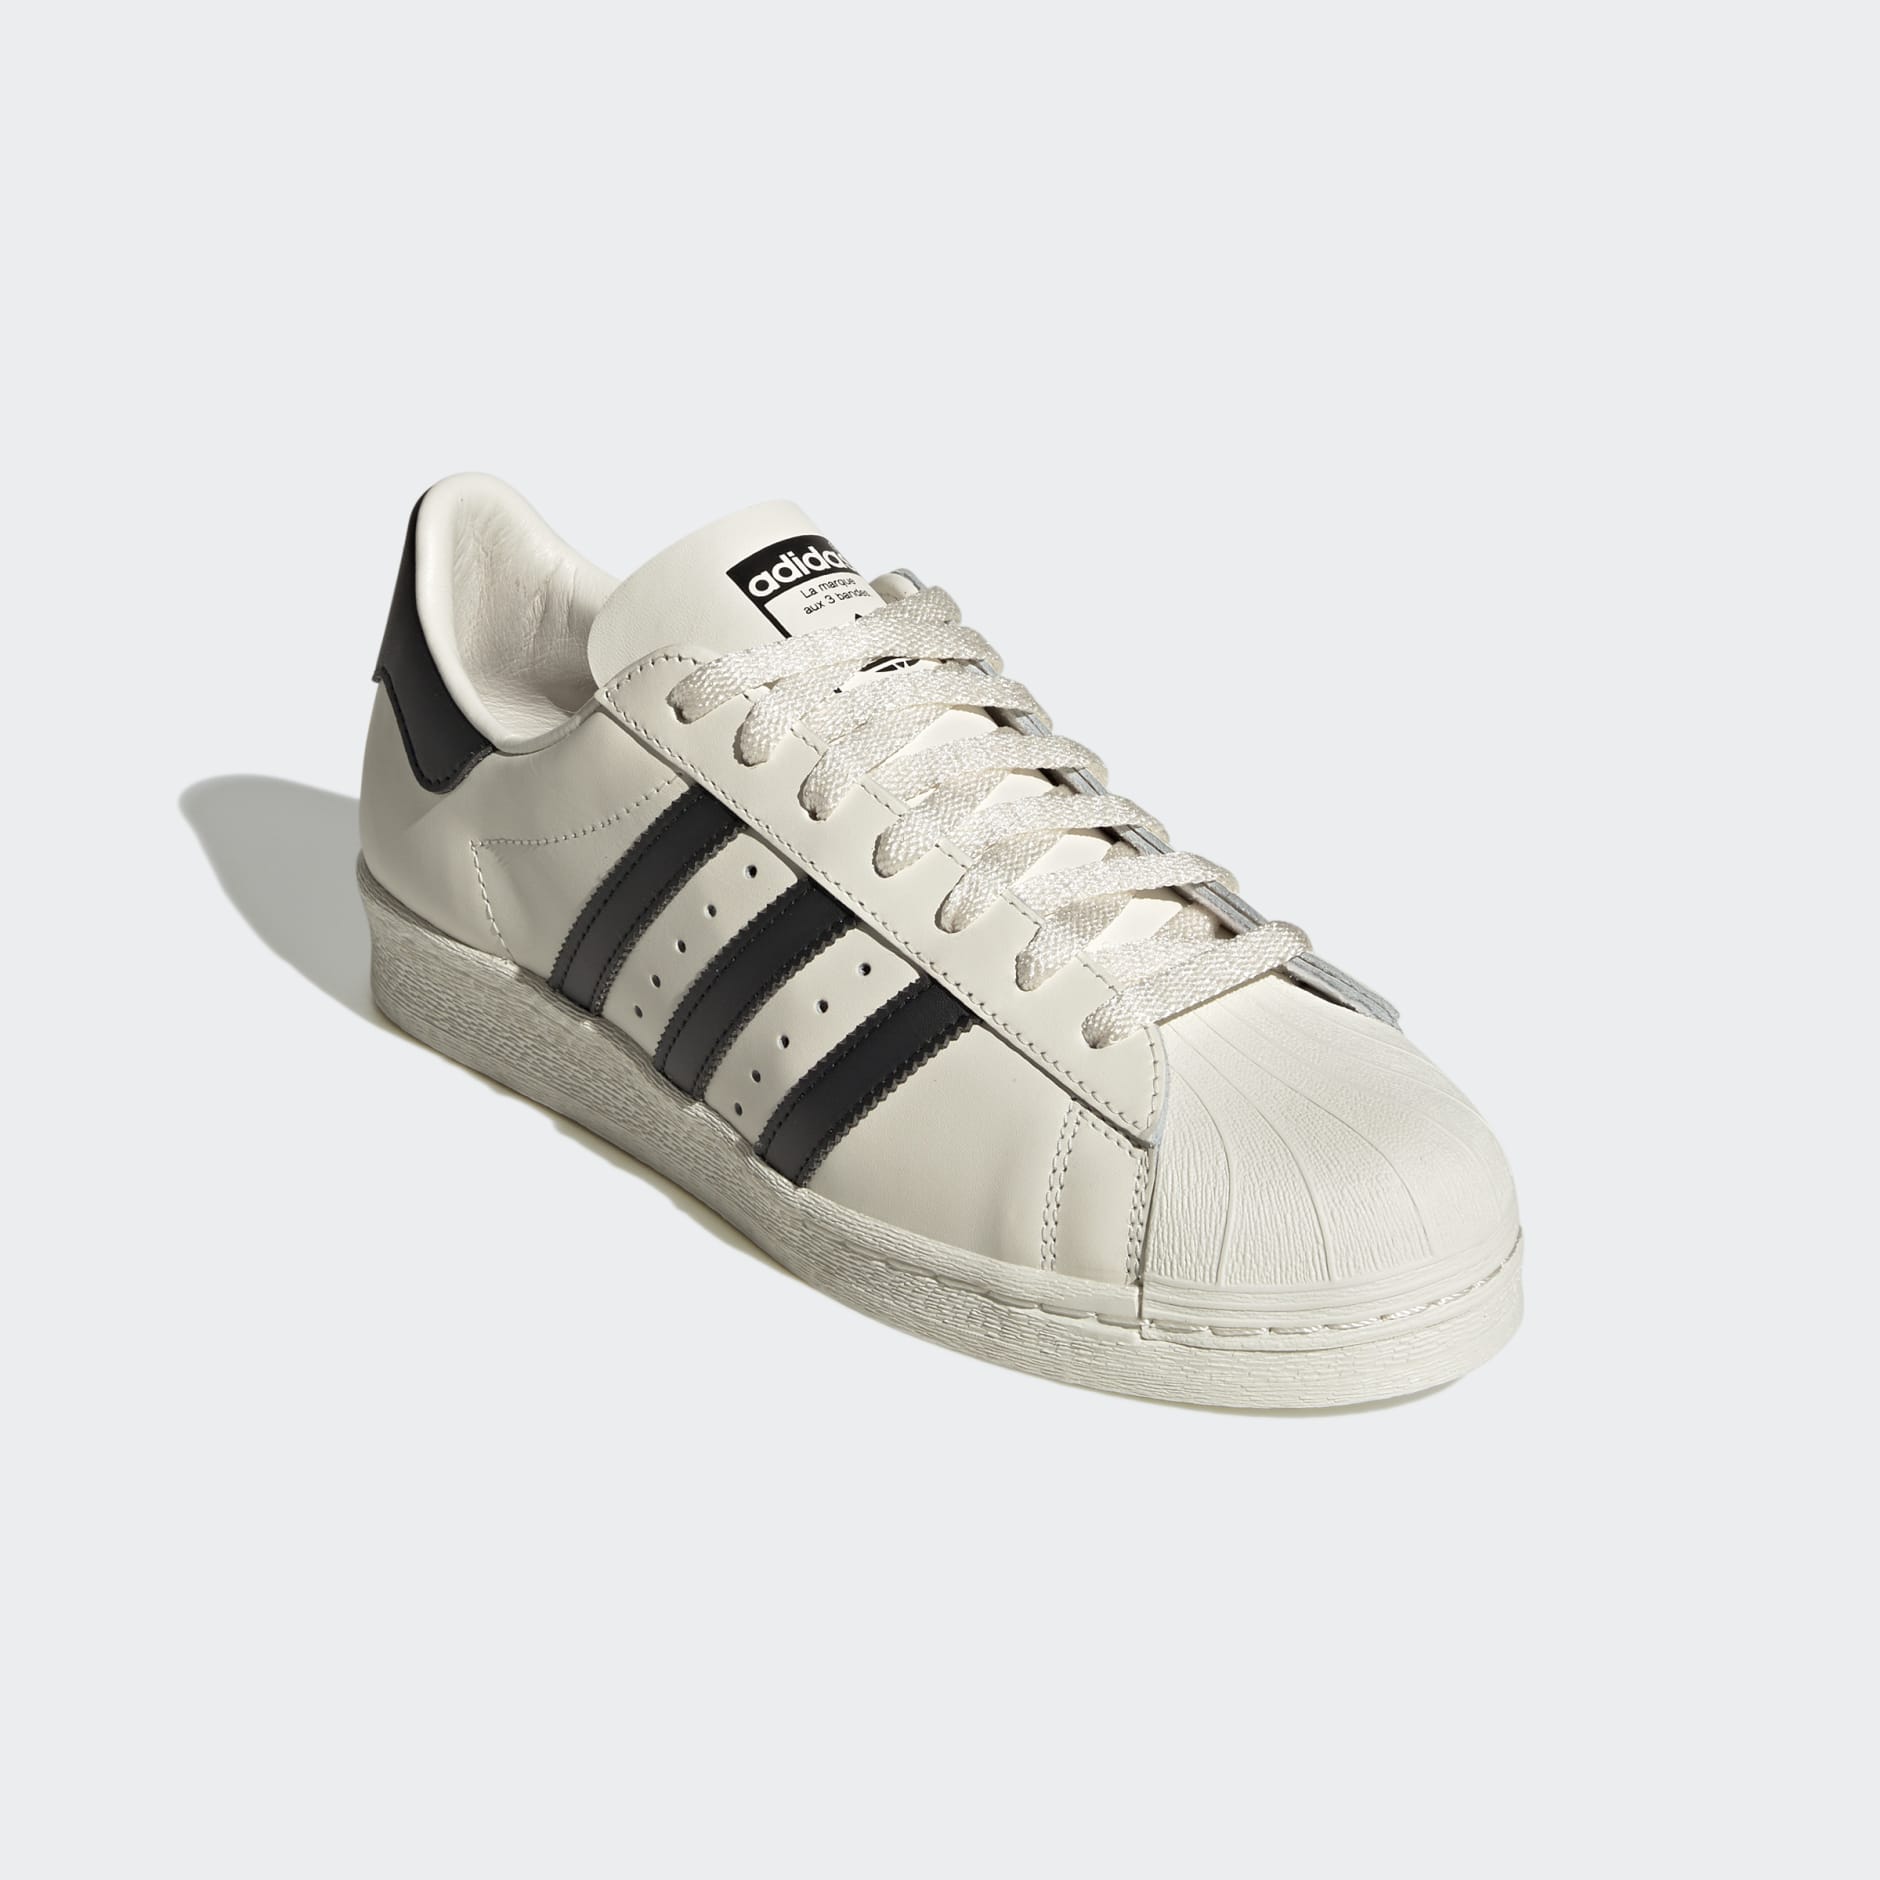 Shoes - Superstar 82 Shoes - White | adidas South Africa